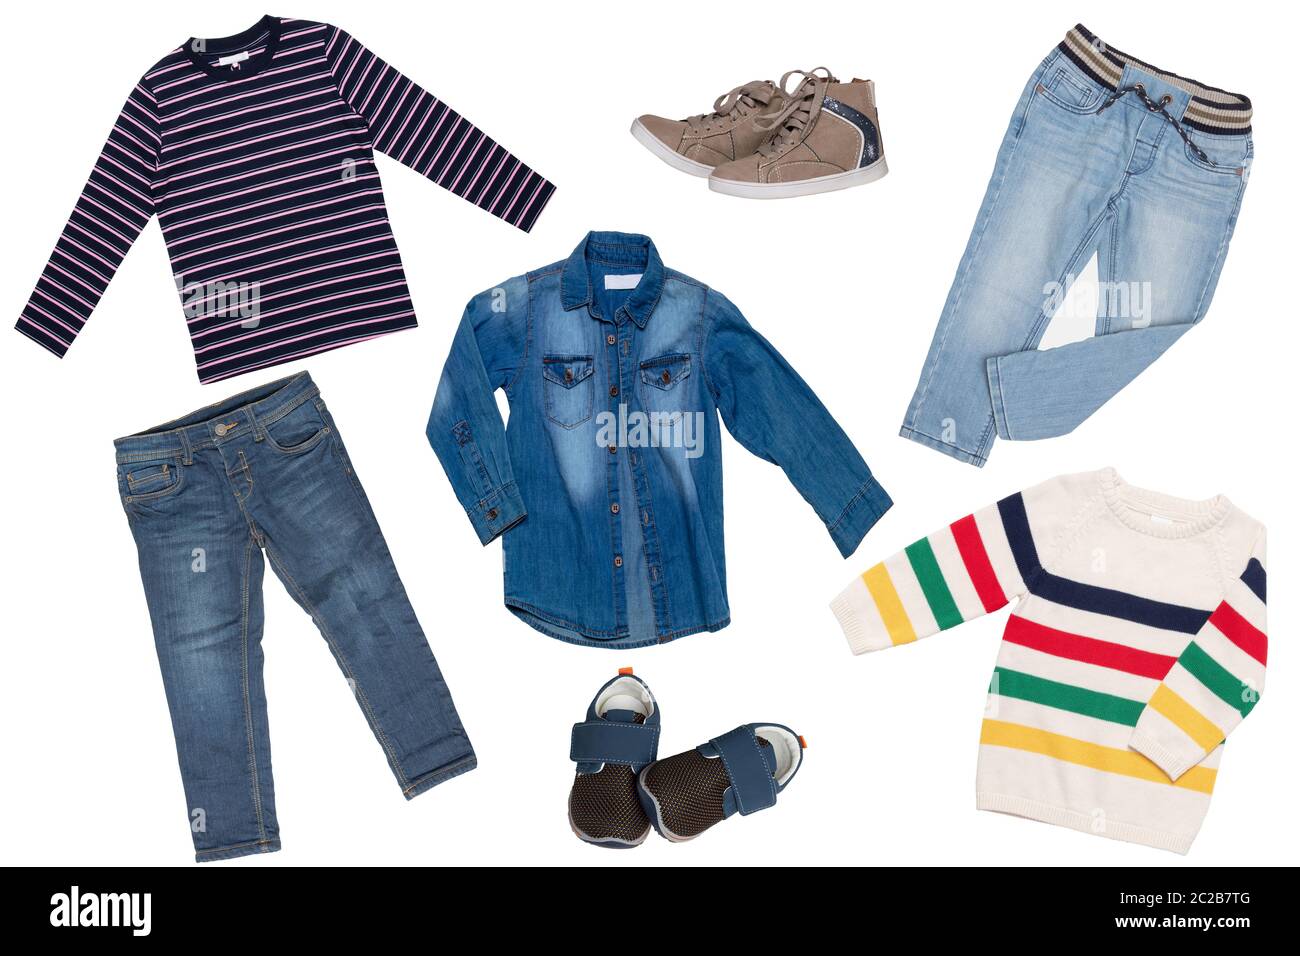 https://c8.alamy.com/comp/2C2B7TG/collage-set-of-children-clothes-denim-jeans-or-pants-two-pair-shoes-a-jeans-shirt-striped-shirt-and-a-sweater-for-child-boy-isolated-on-a-white-ba-2C2B7TG.jpg